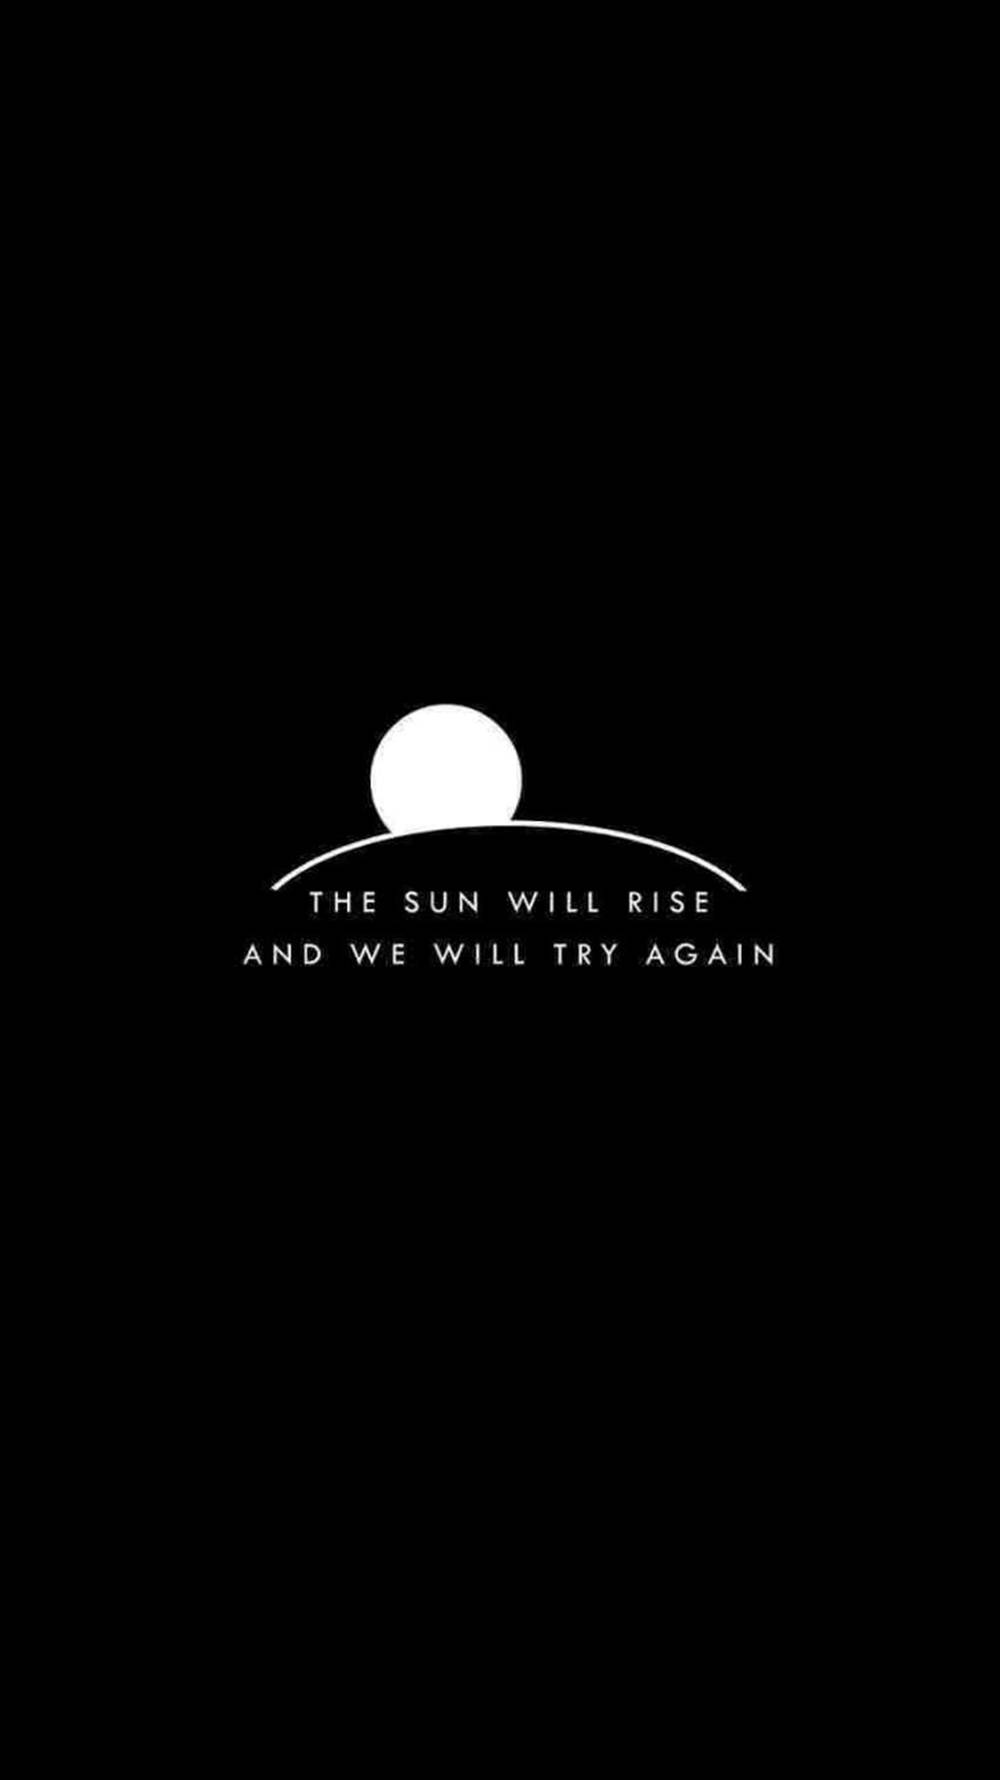 We Will Try Again Aesthetic Black Quotes Wallpaper